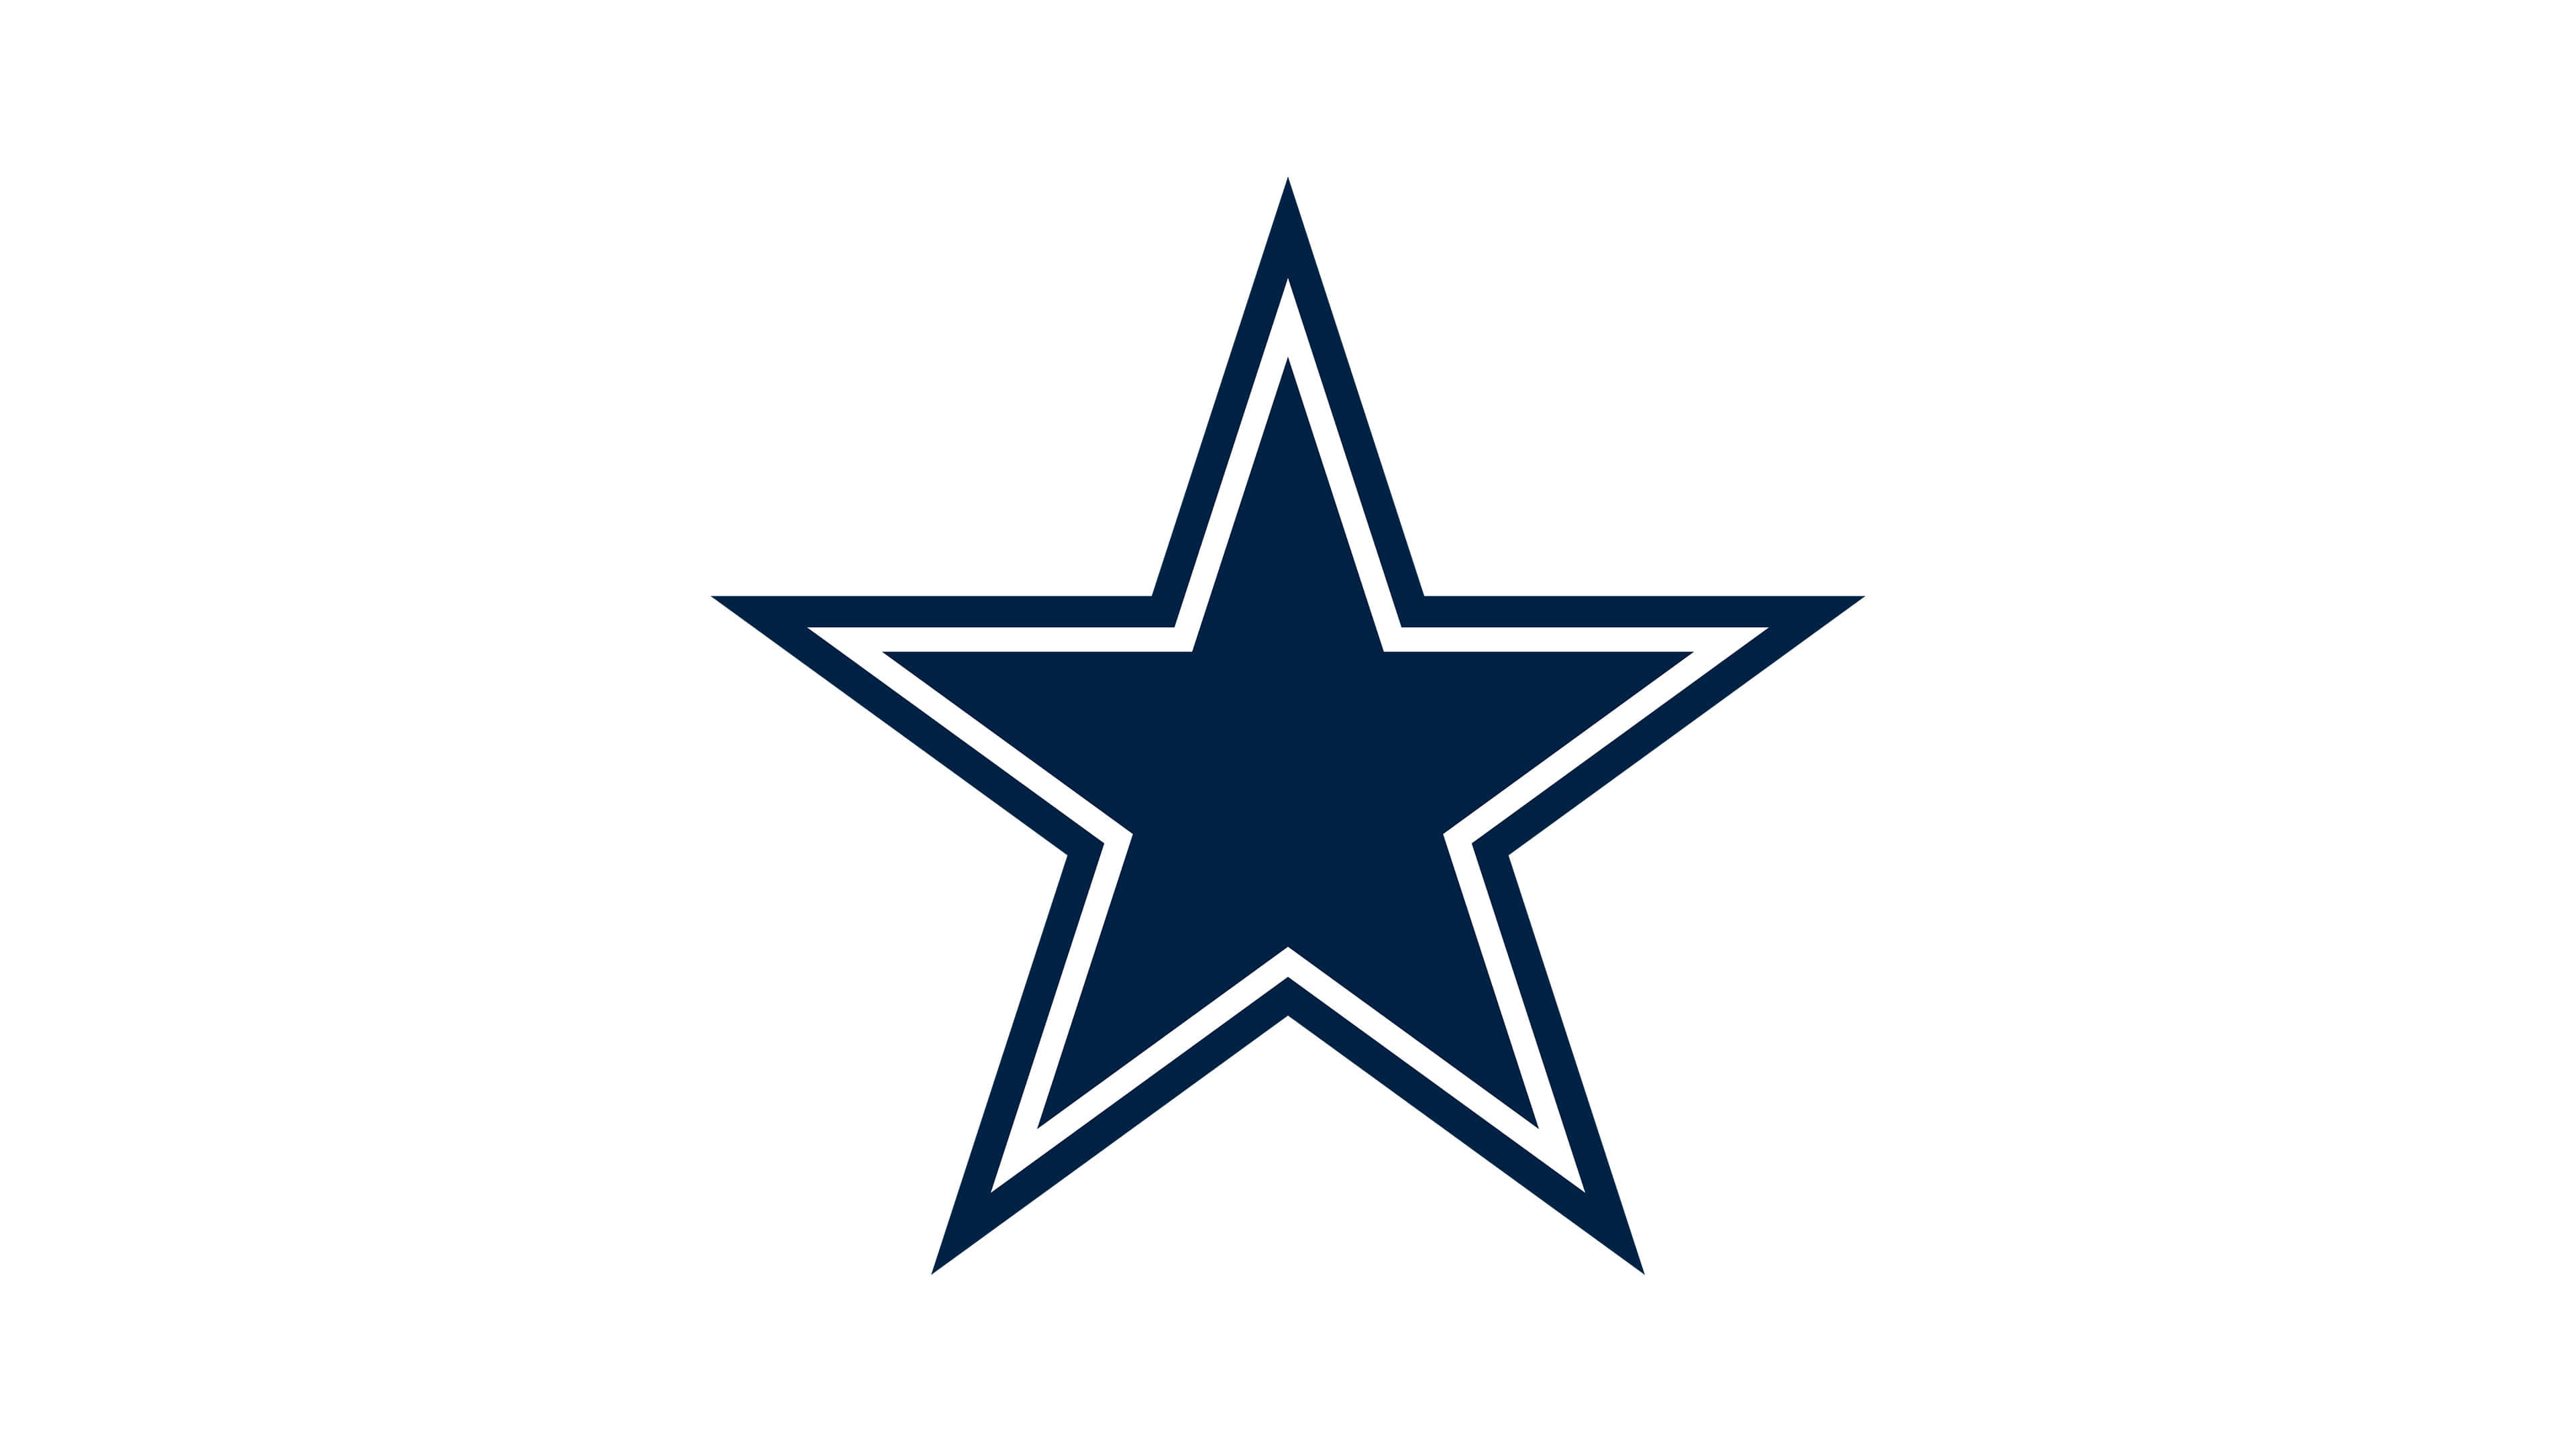 Dallas Cowboys: The team is headquartered in Frisco, Texas, NFL, Football. 3840x2160 4K Wallpaper.